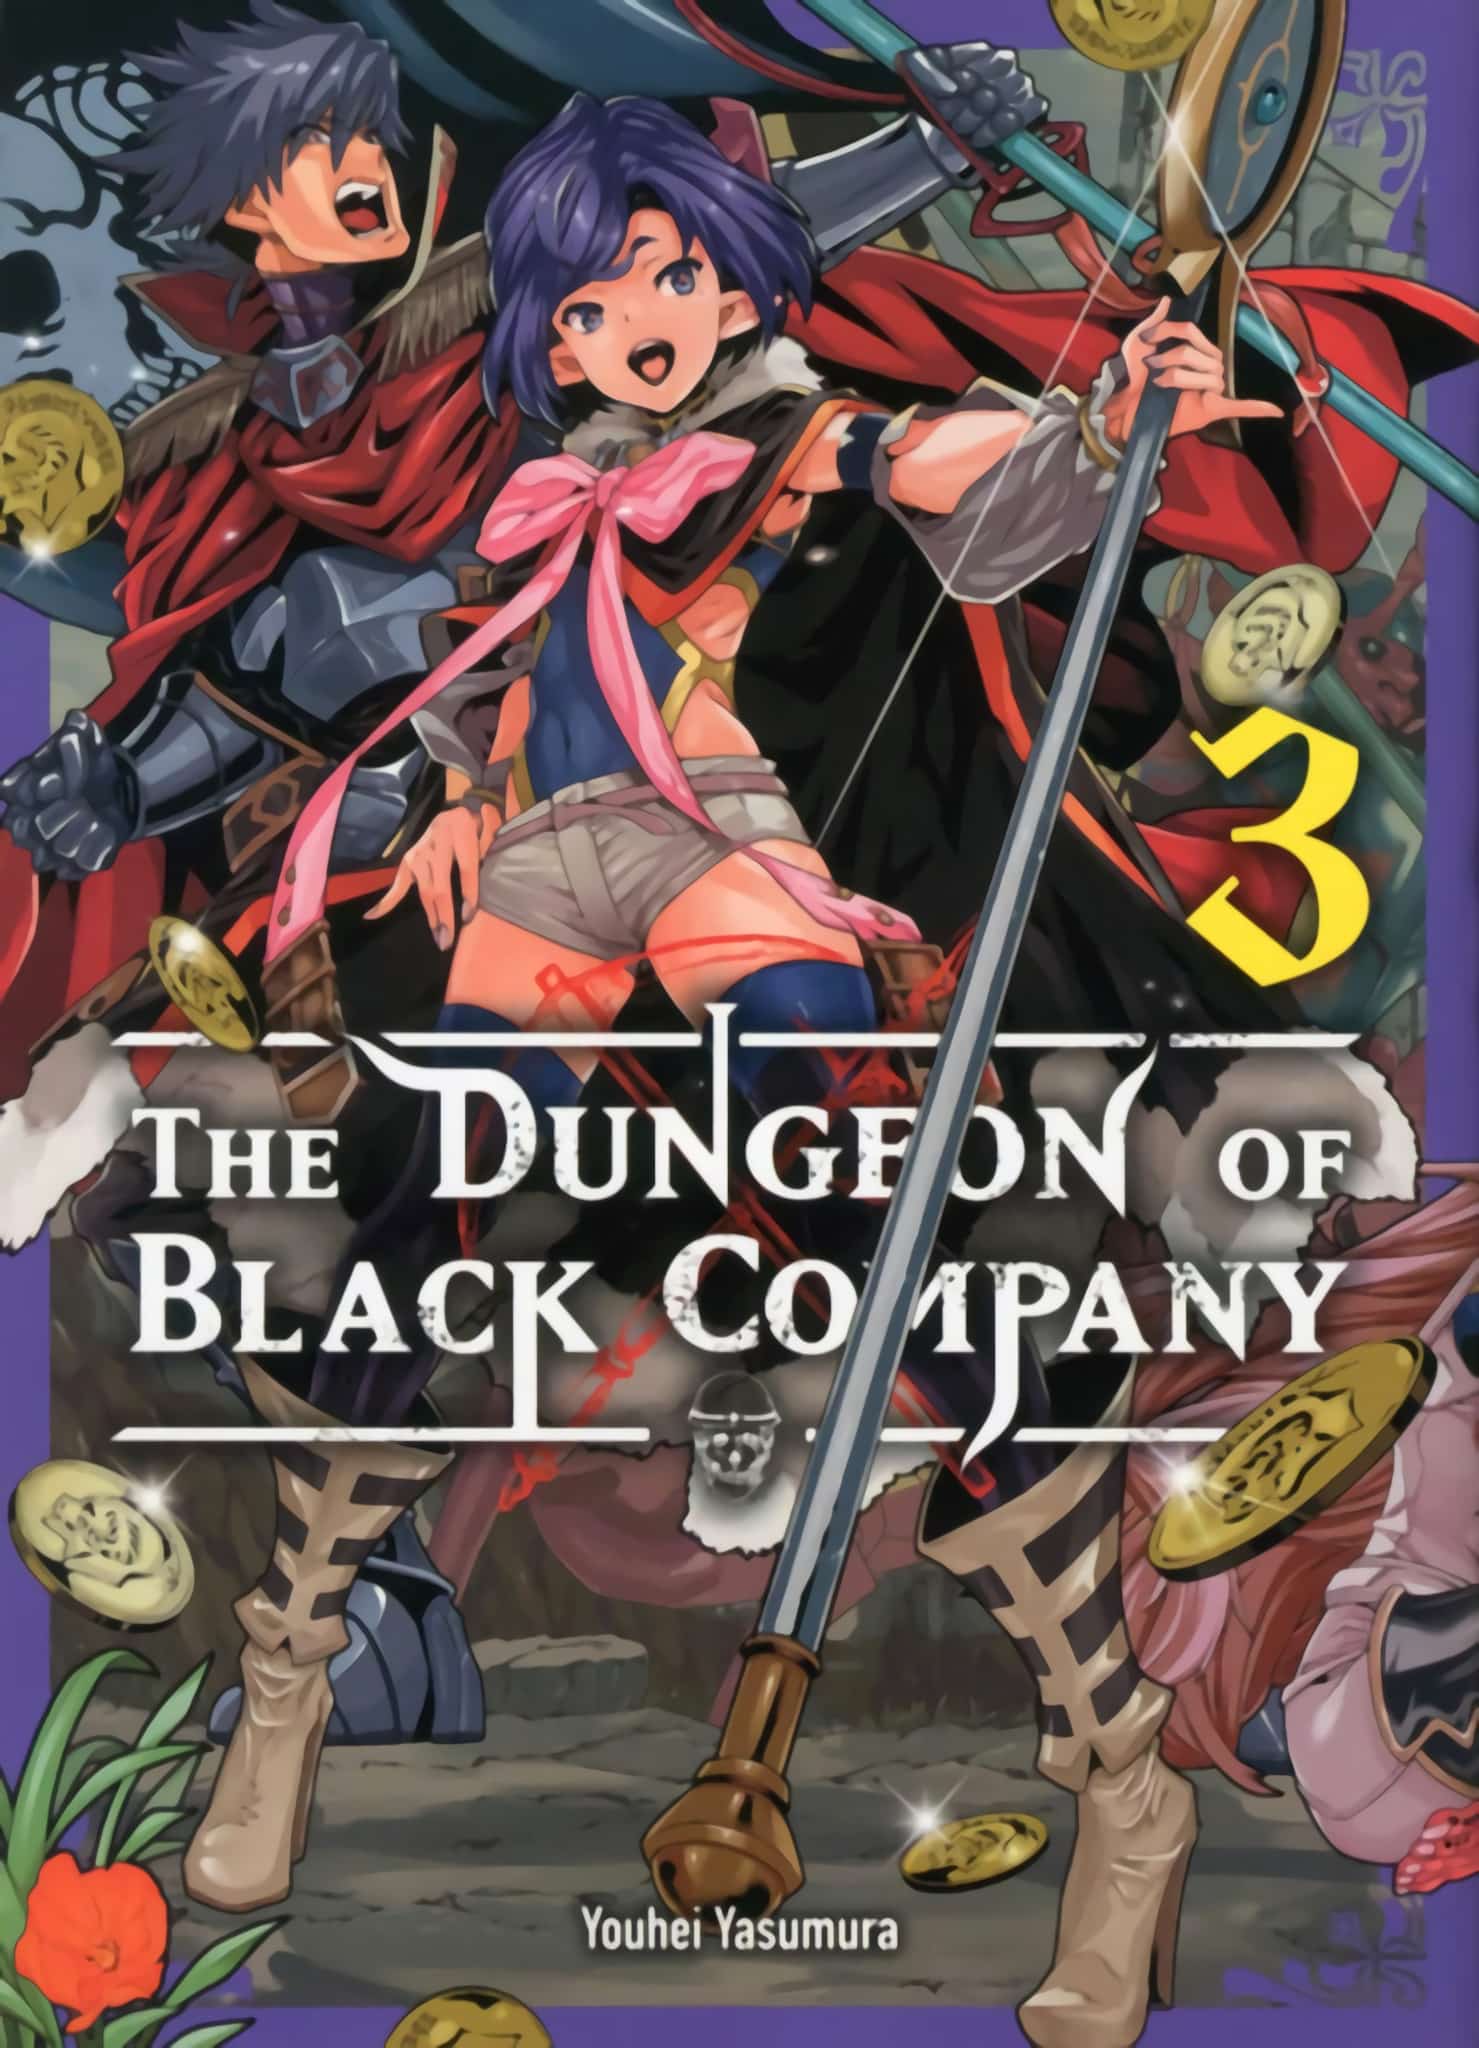 Tome 3 du manga The Dungeon of Black Company